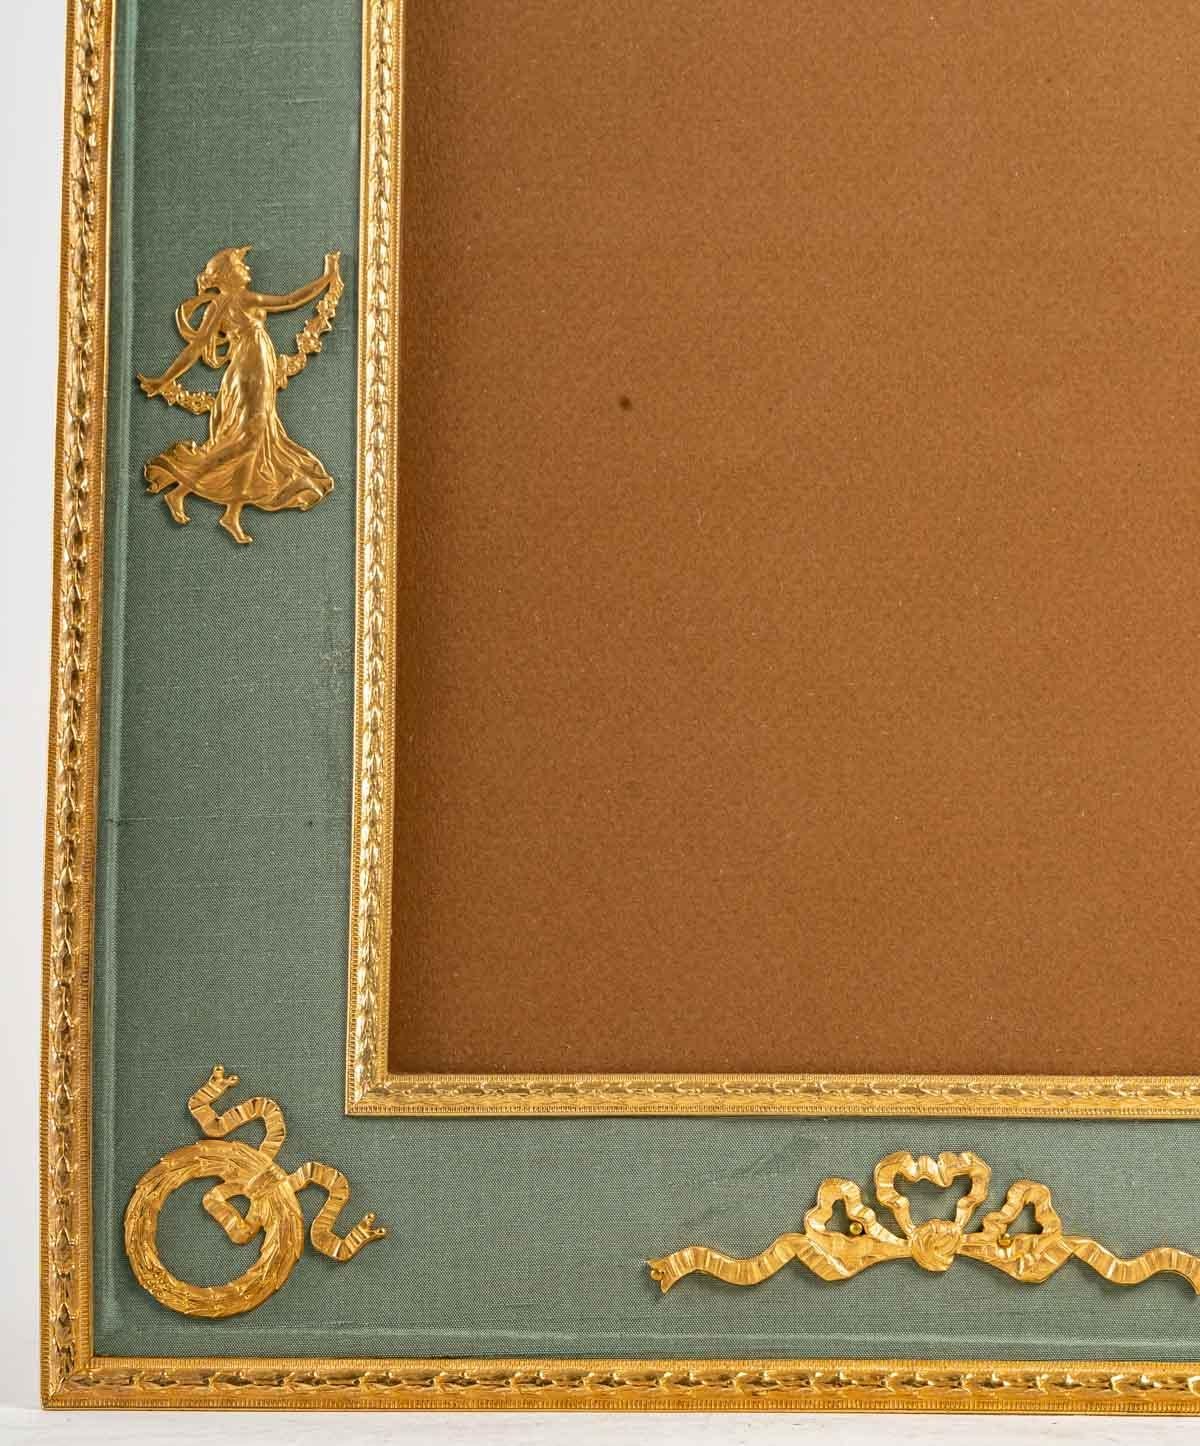 European Large gilt bronze and pale green fabric photo frame, 19th century